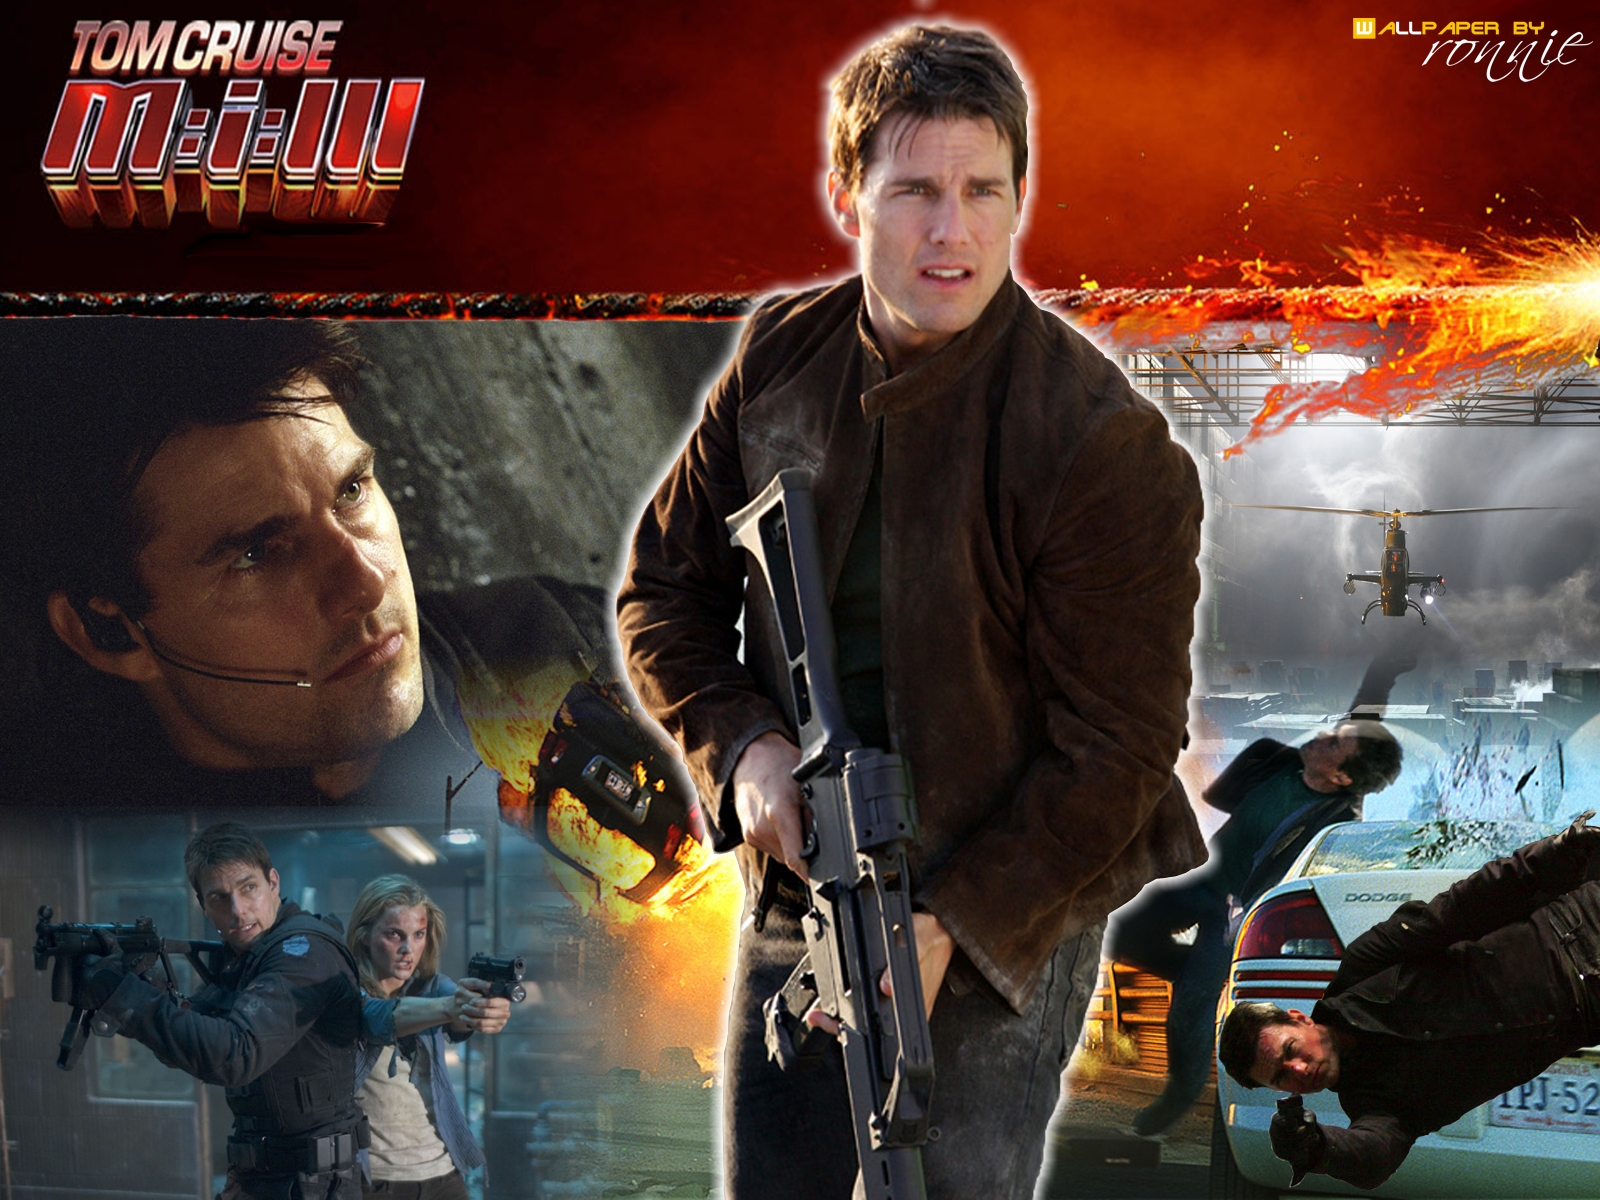 Download full size Mission Impossible wallpaper / Movies / 1600x1200